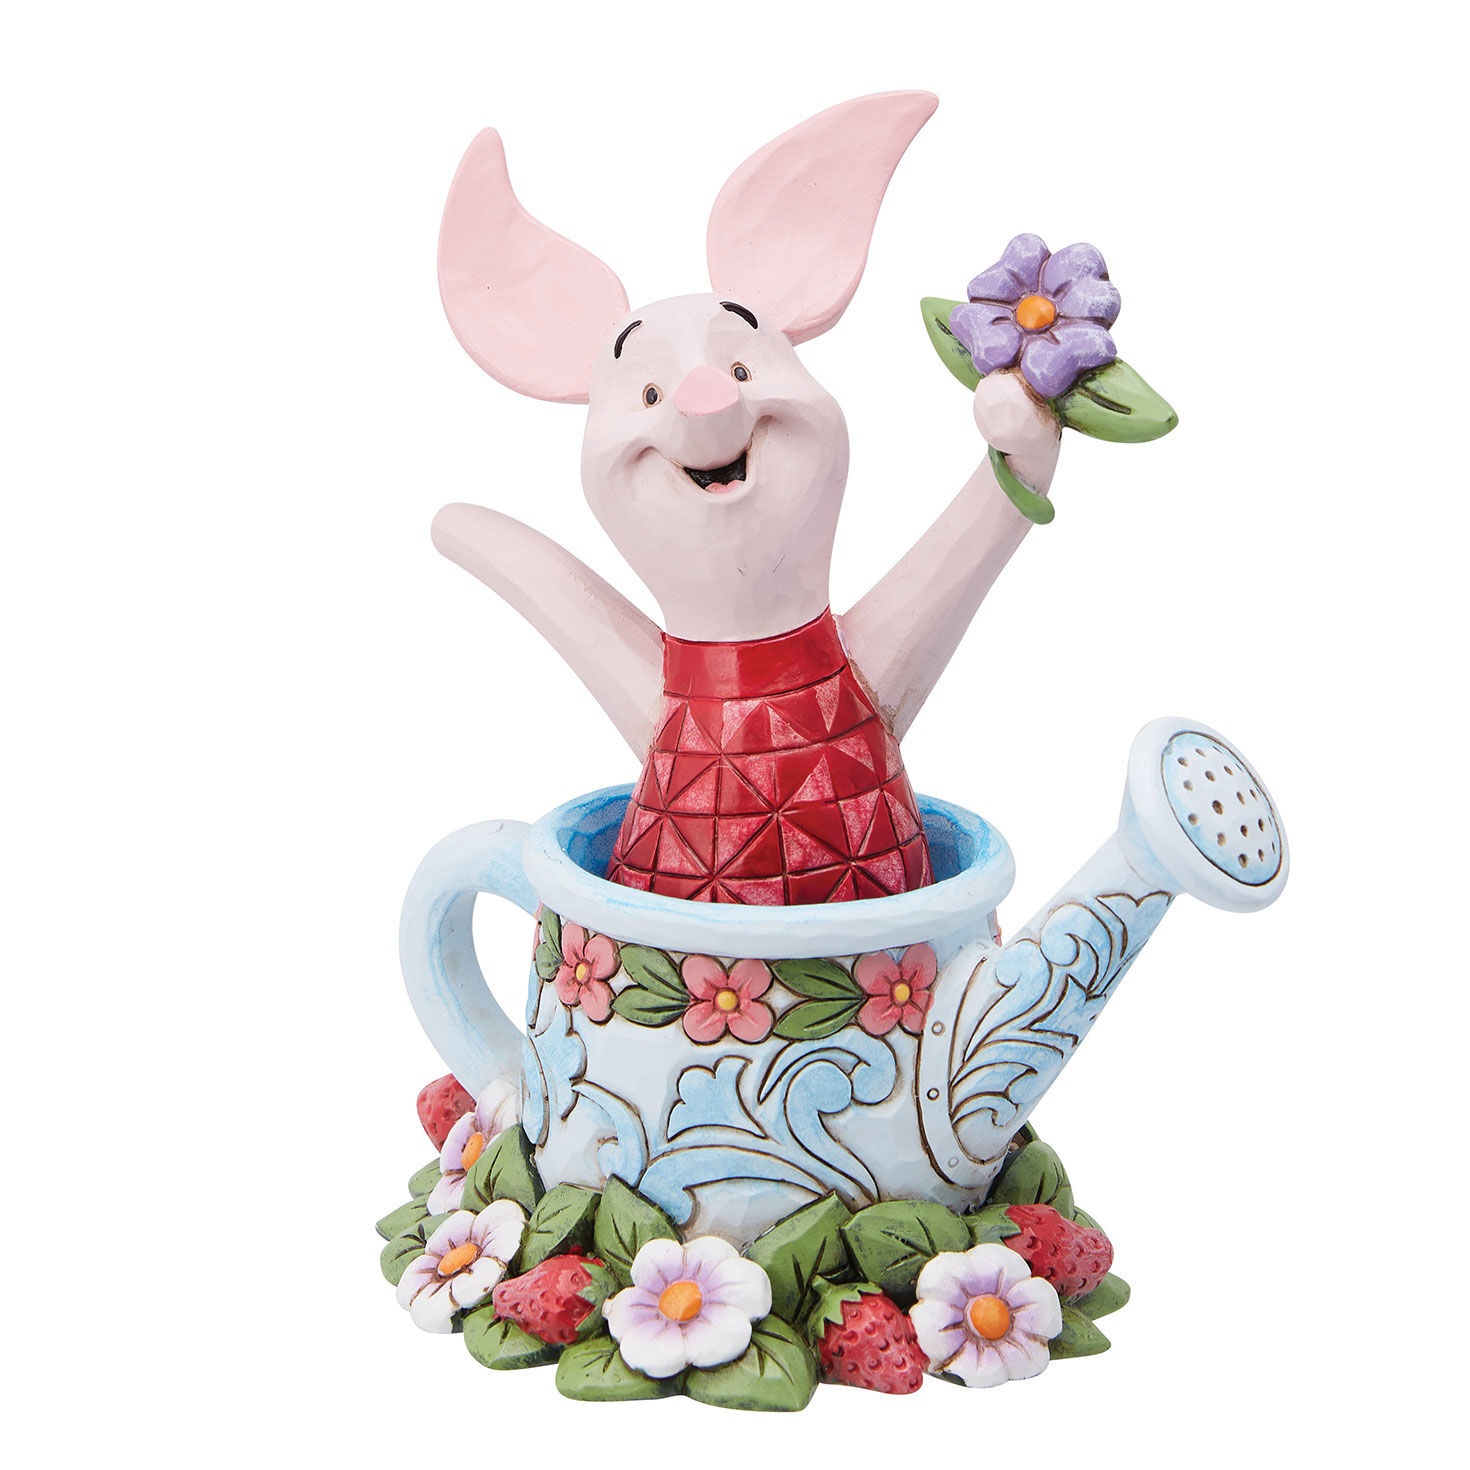 Jim Shore Disney Piglet in Watering Can Figurine, 4.5" for only USD 34.99 | Hallmark